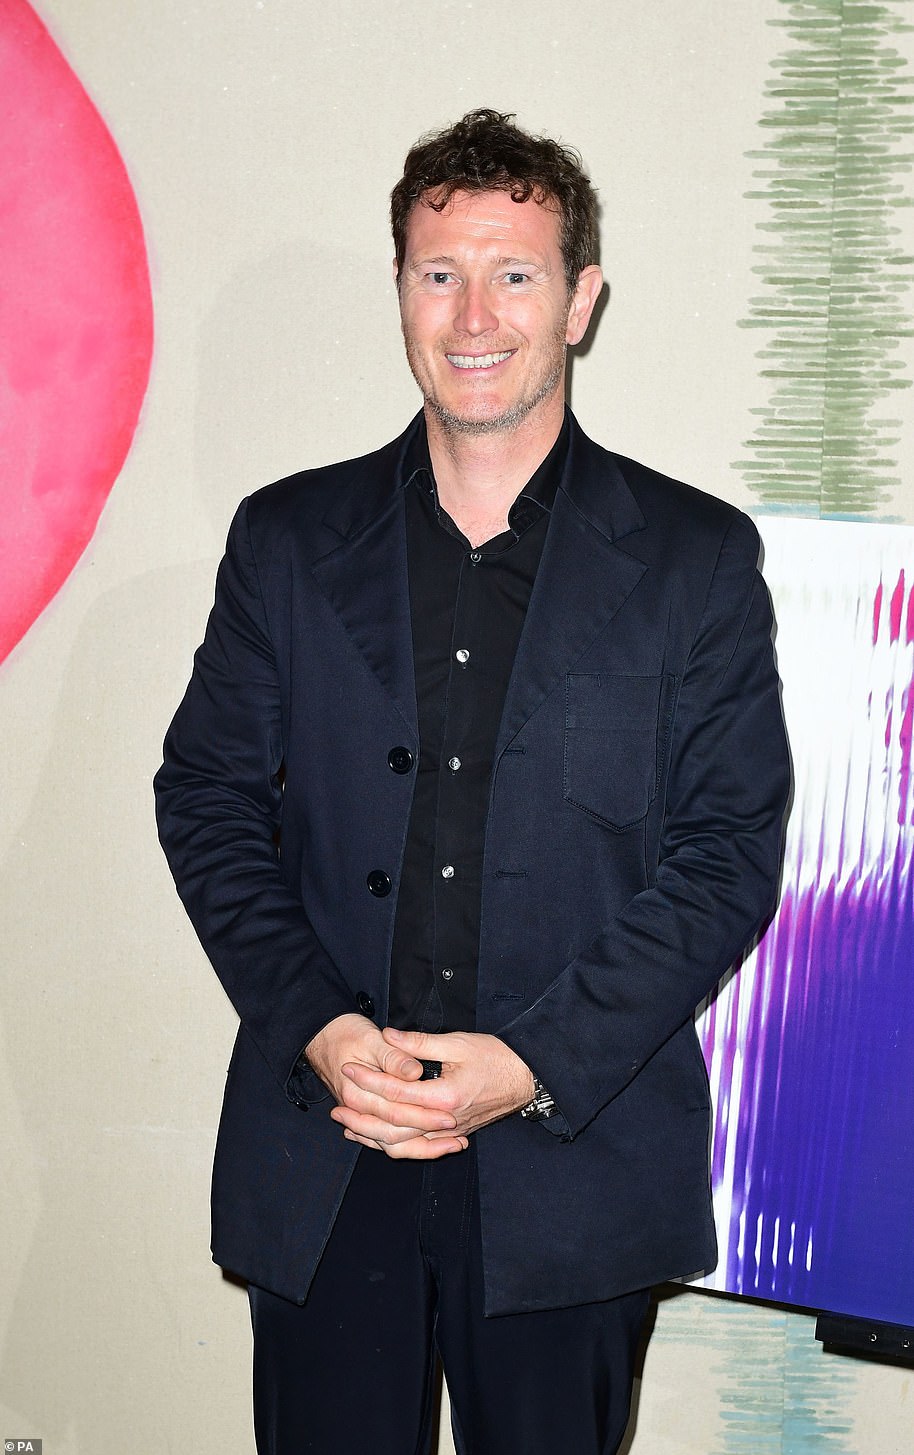 Ex-girlfriend: After Jay, there was a brief rebound fling with Lock, Stock And Two Smoking Barrels actor Nick Moran.